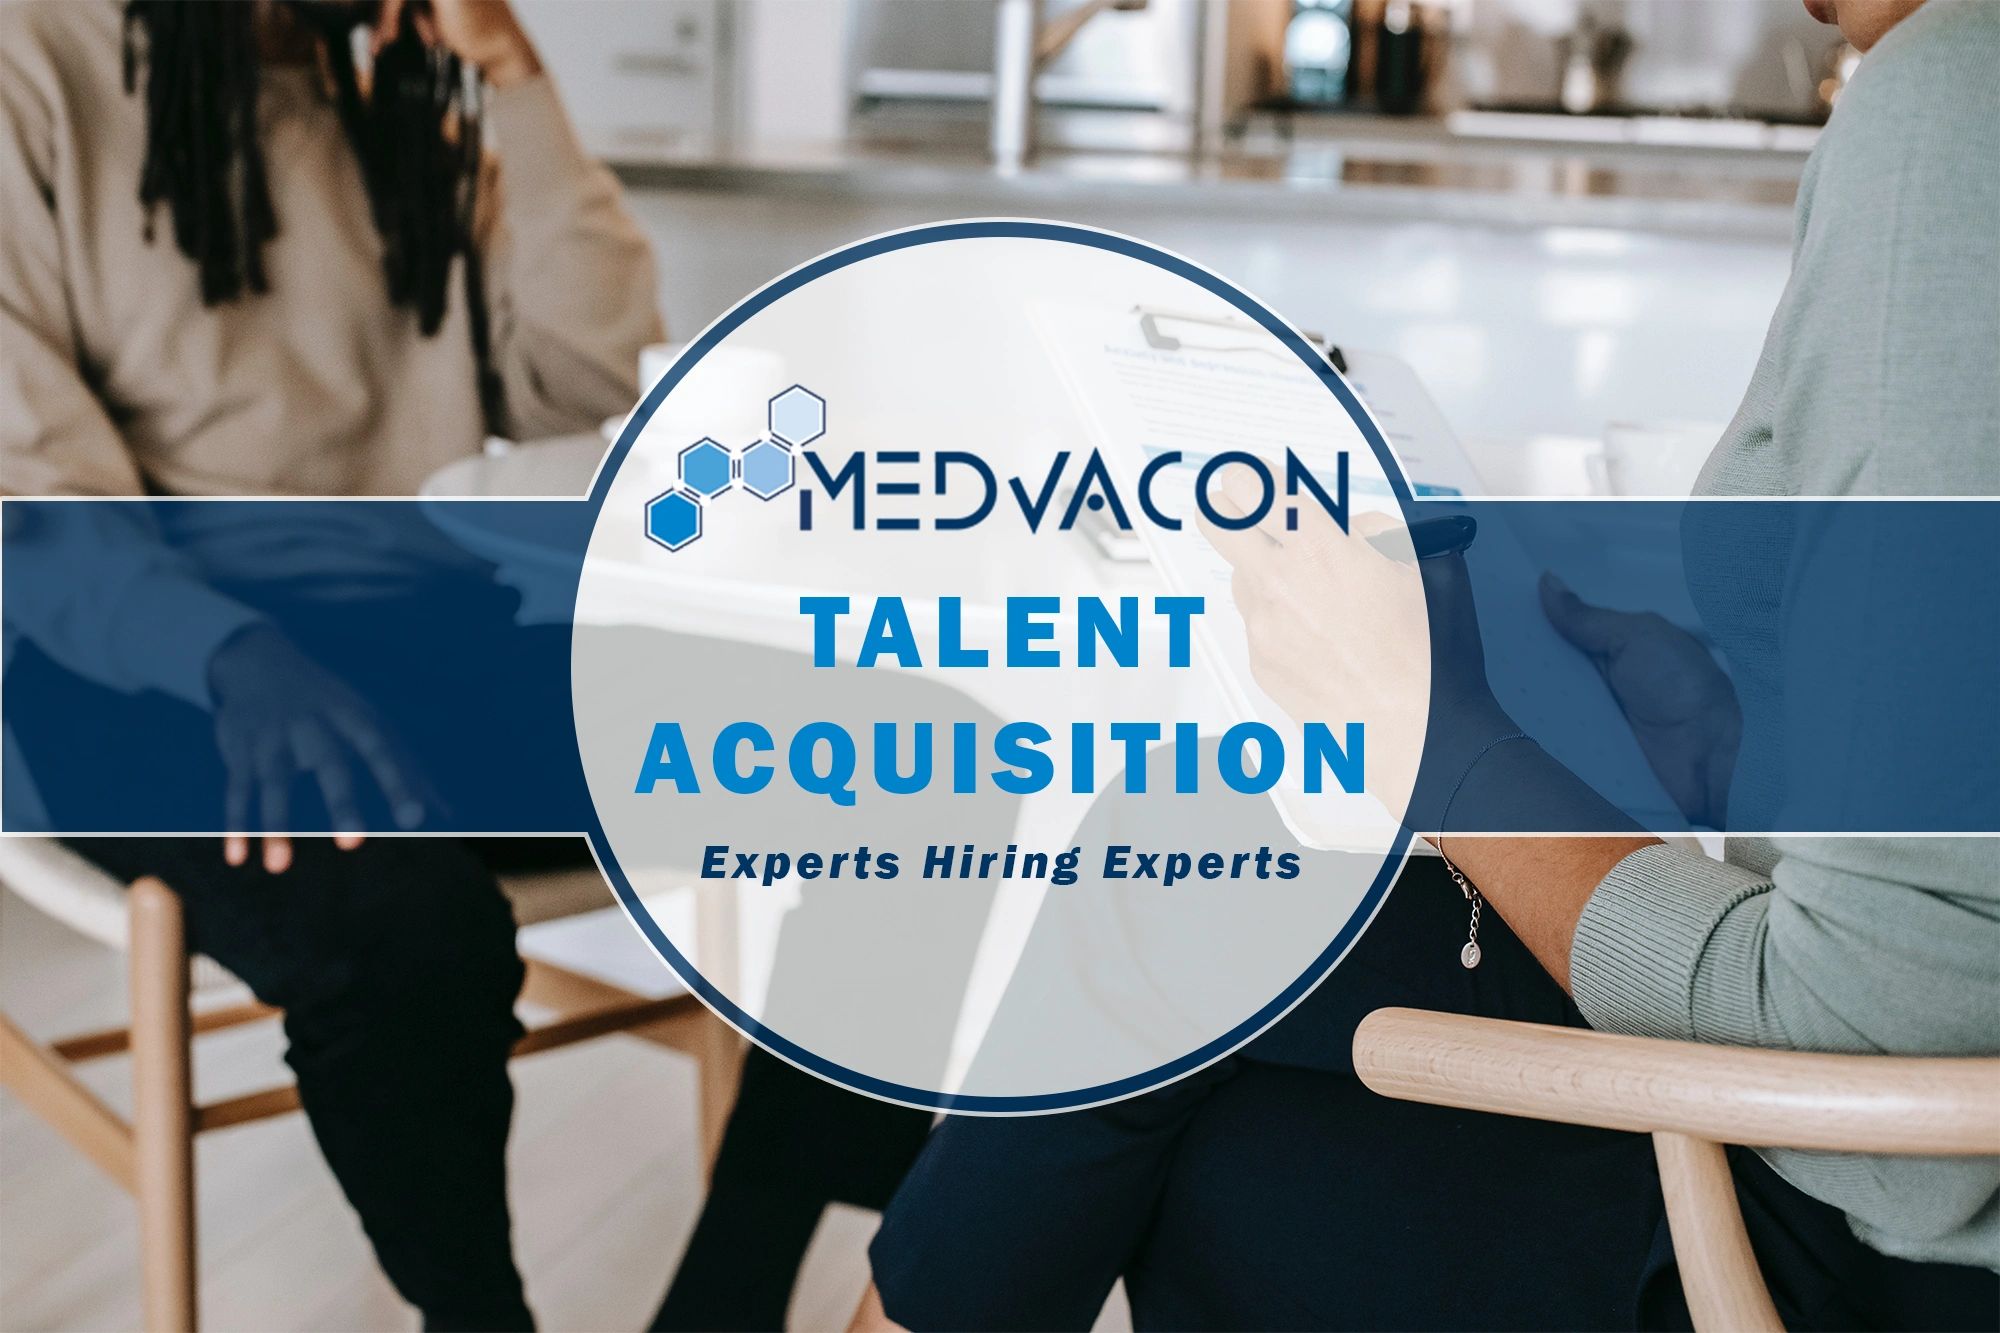 2 people chatting at an interview. "Medvacon Talent Acquisition" "experts hiring experts"